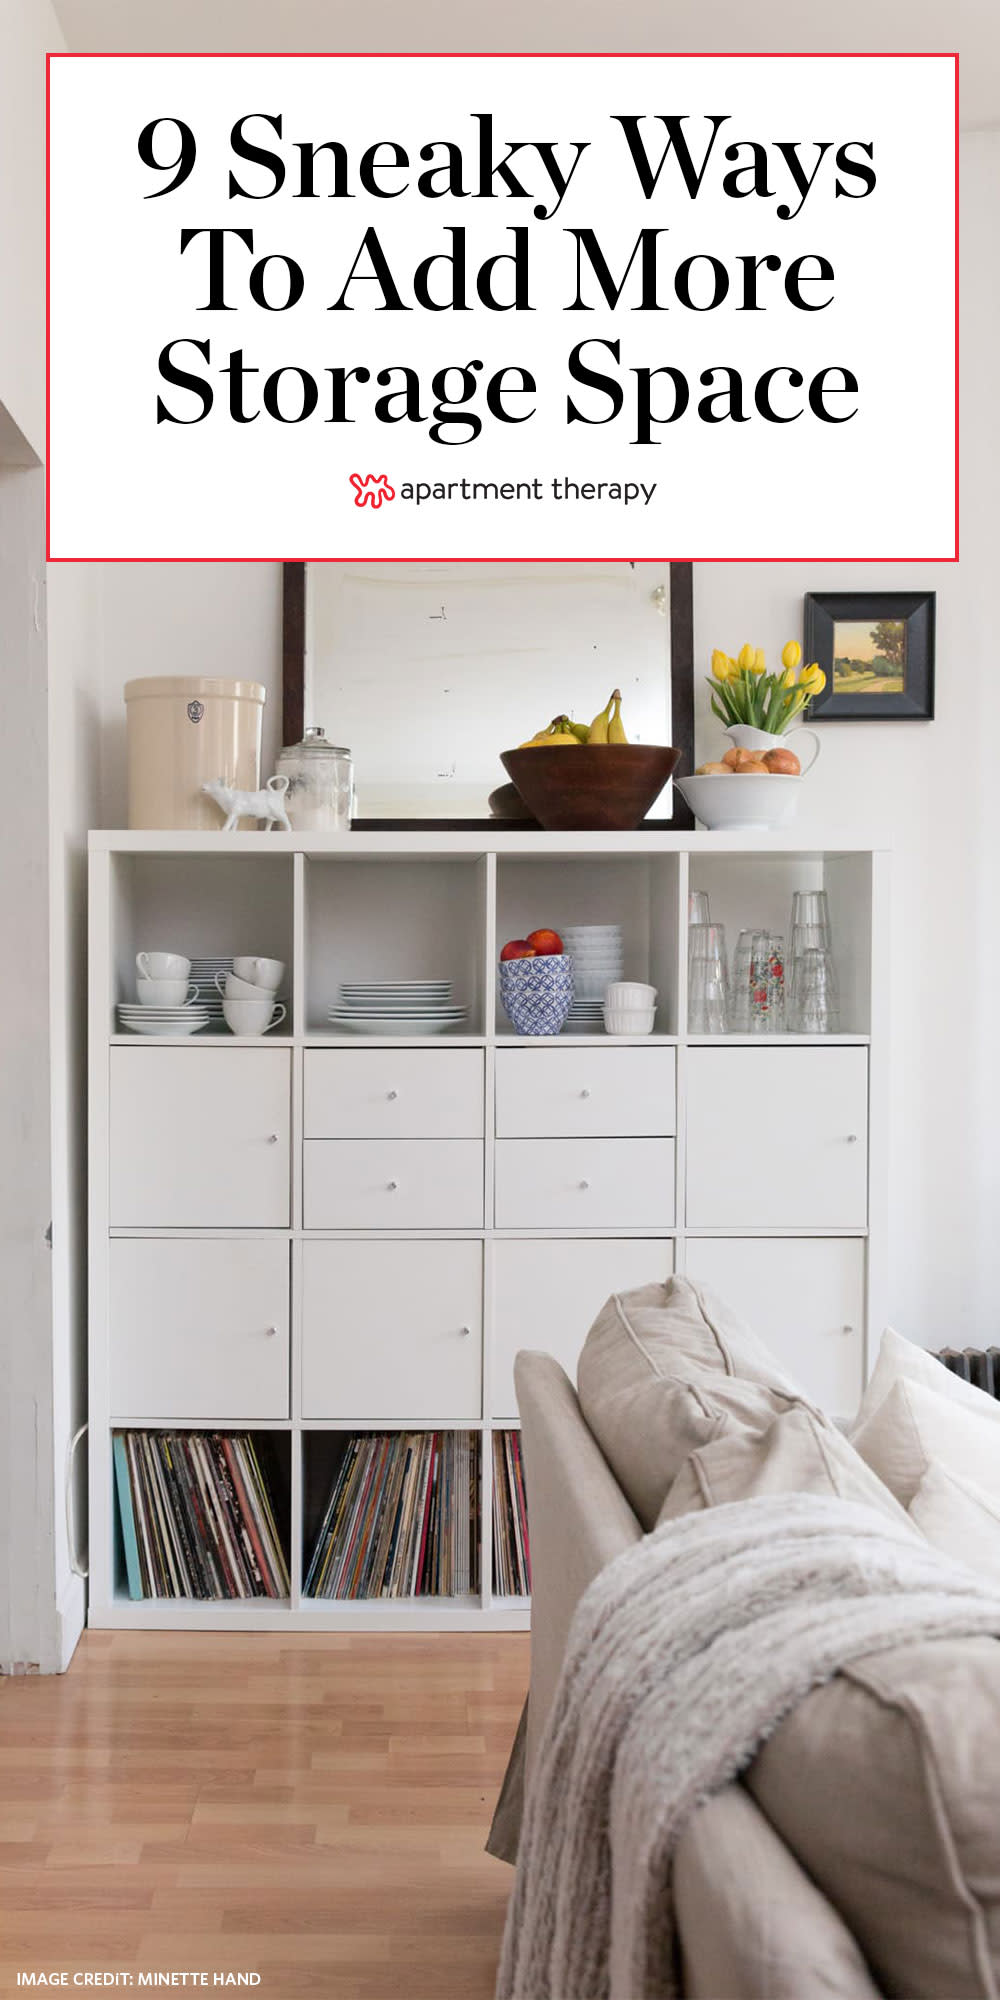 6 design hacks to maximize space in a small home that you need to know